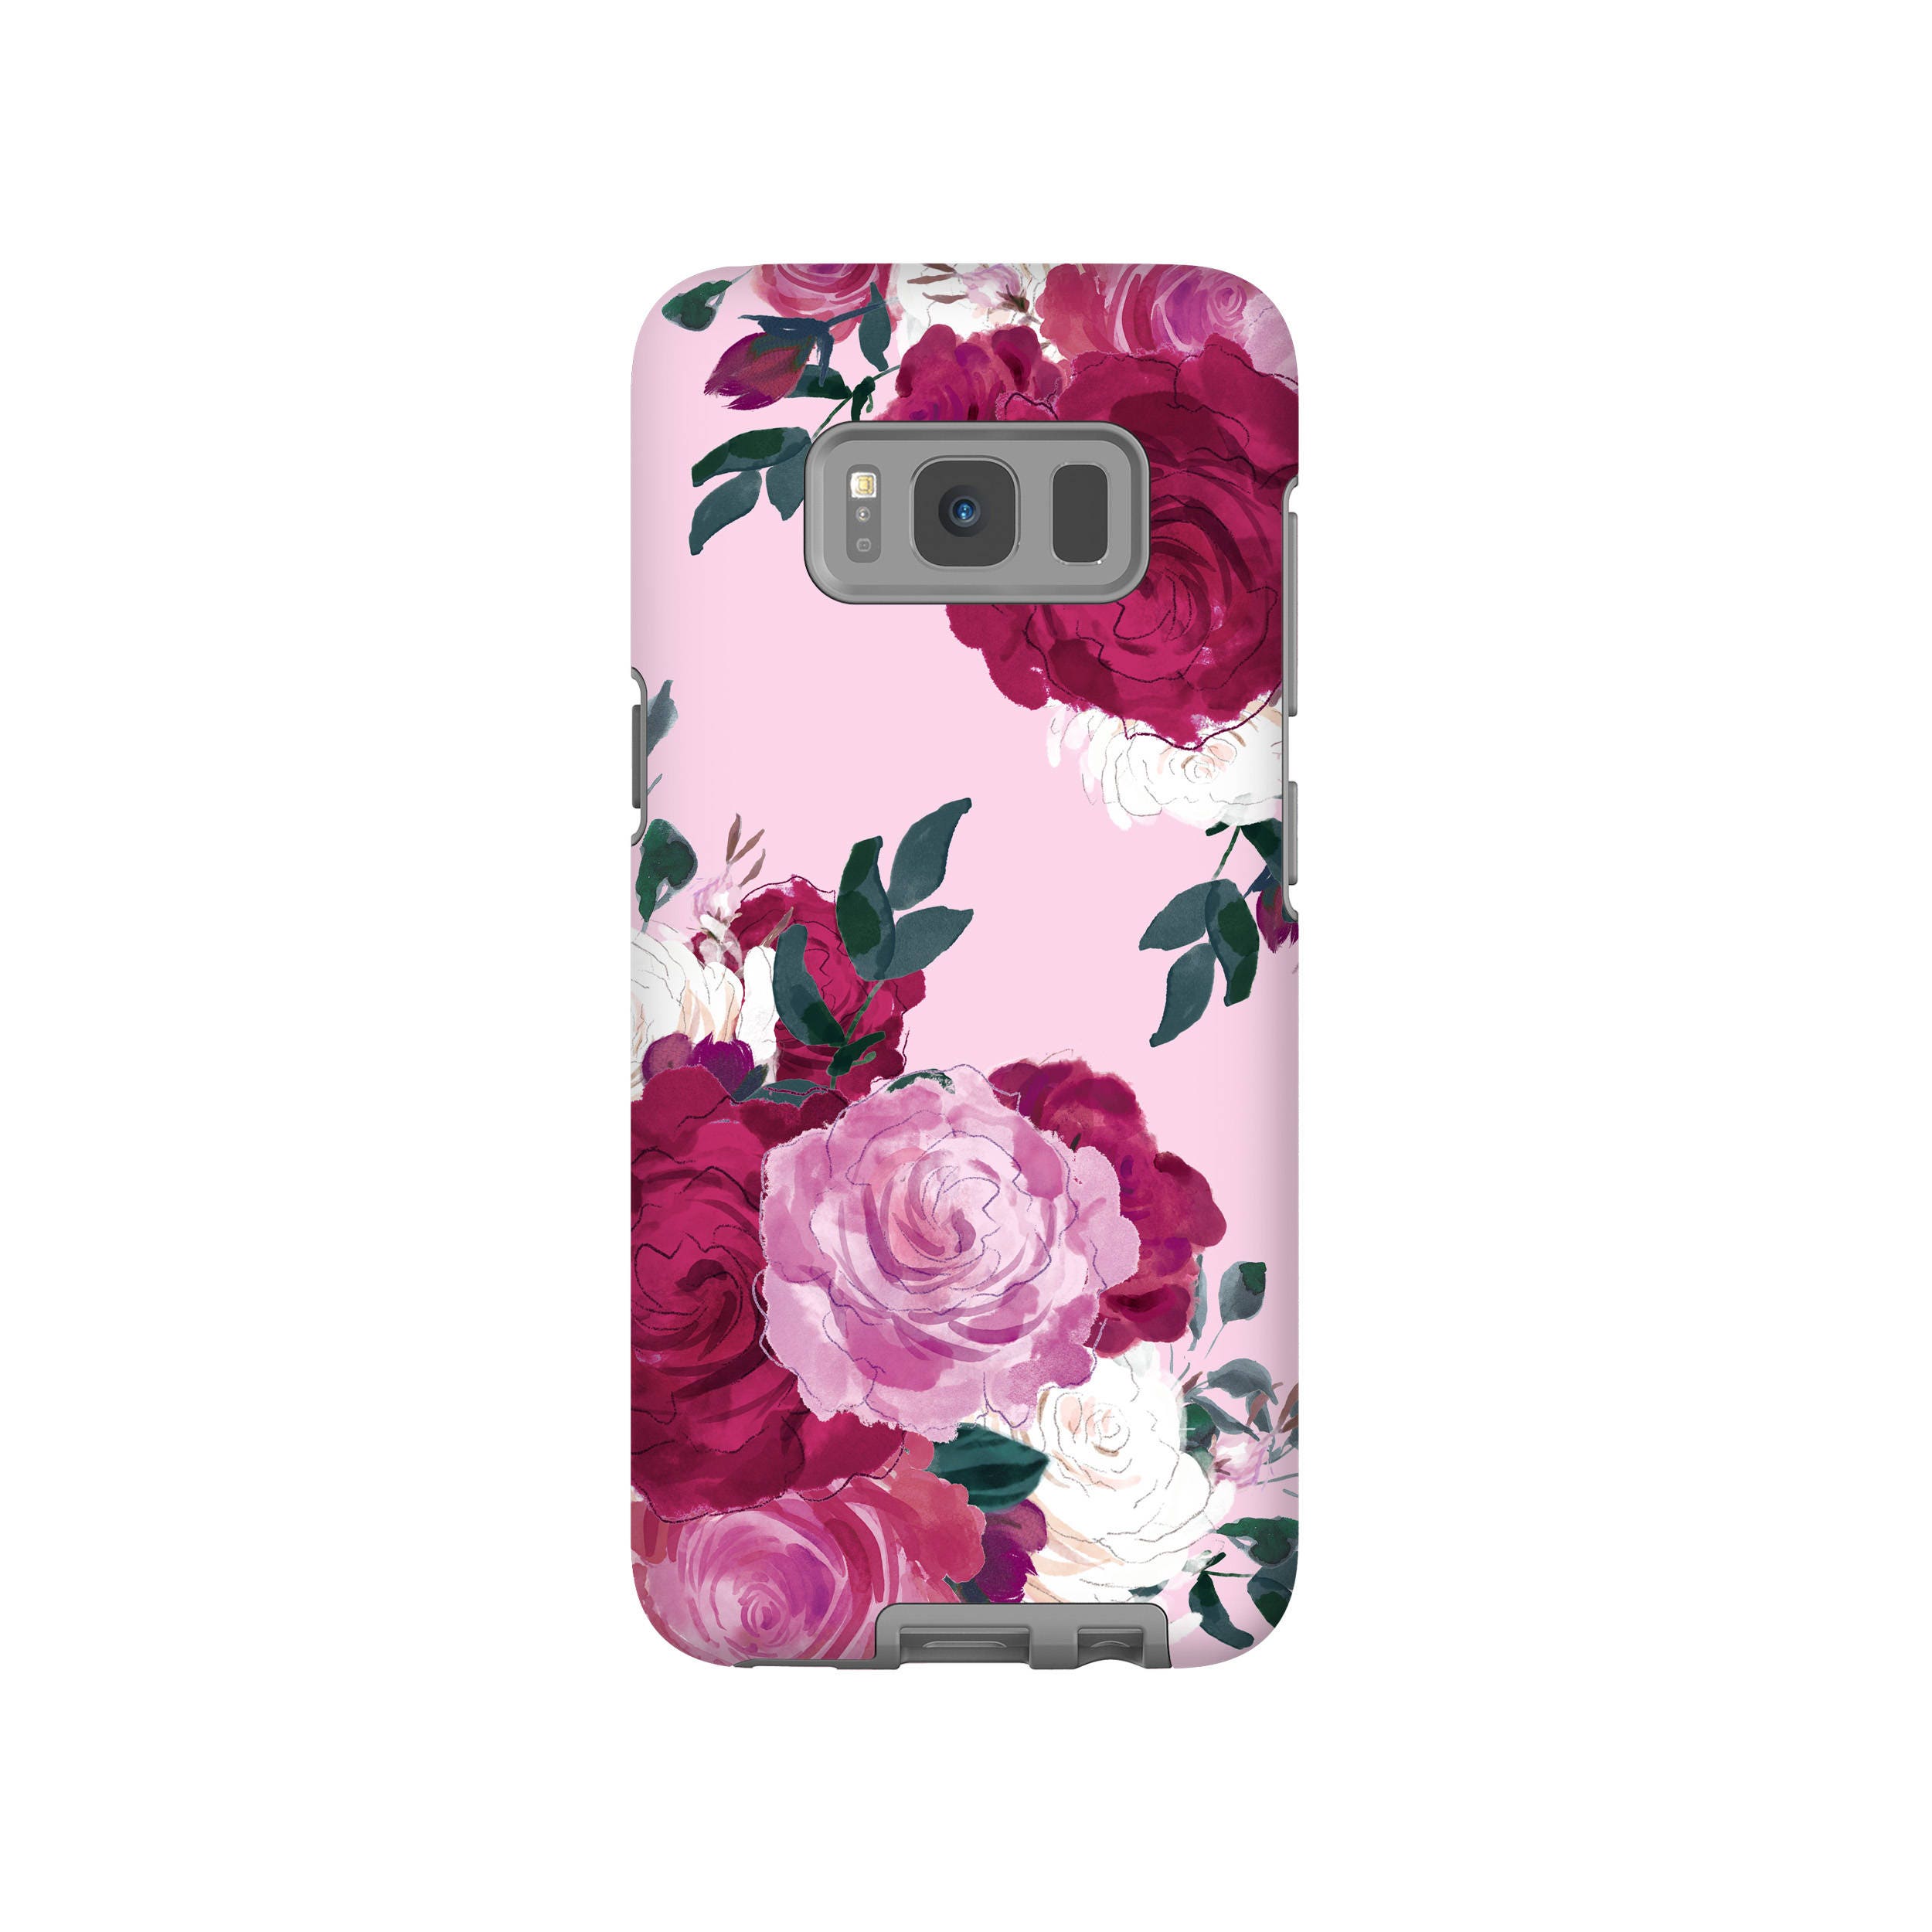 Rose Phone Case Pretty Watercolor Floral Girly Iphone 6 7 8 - Etsy